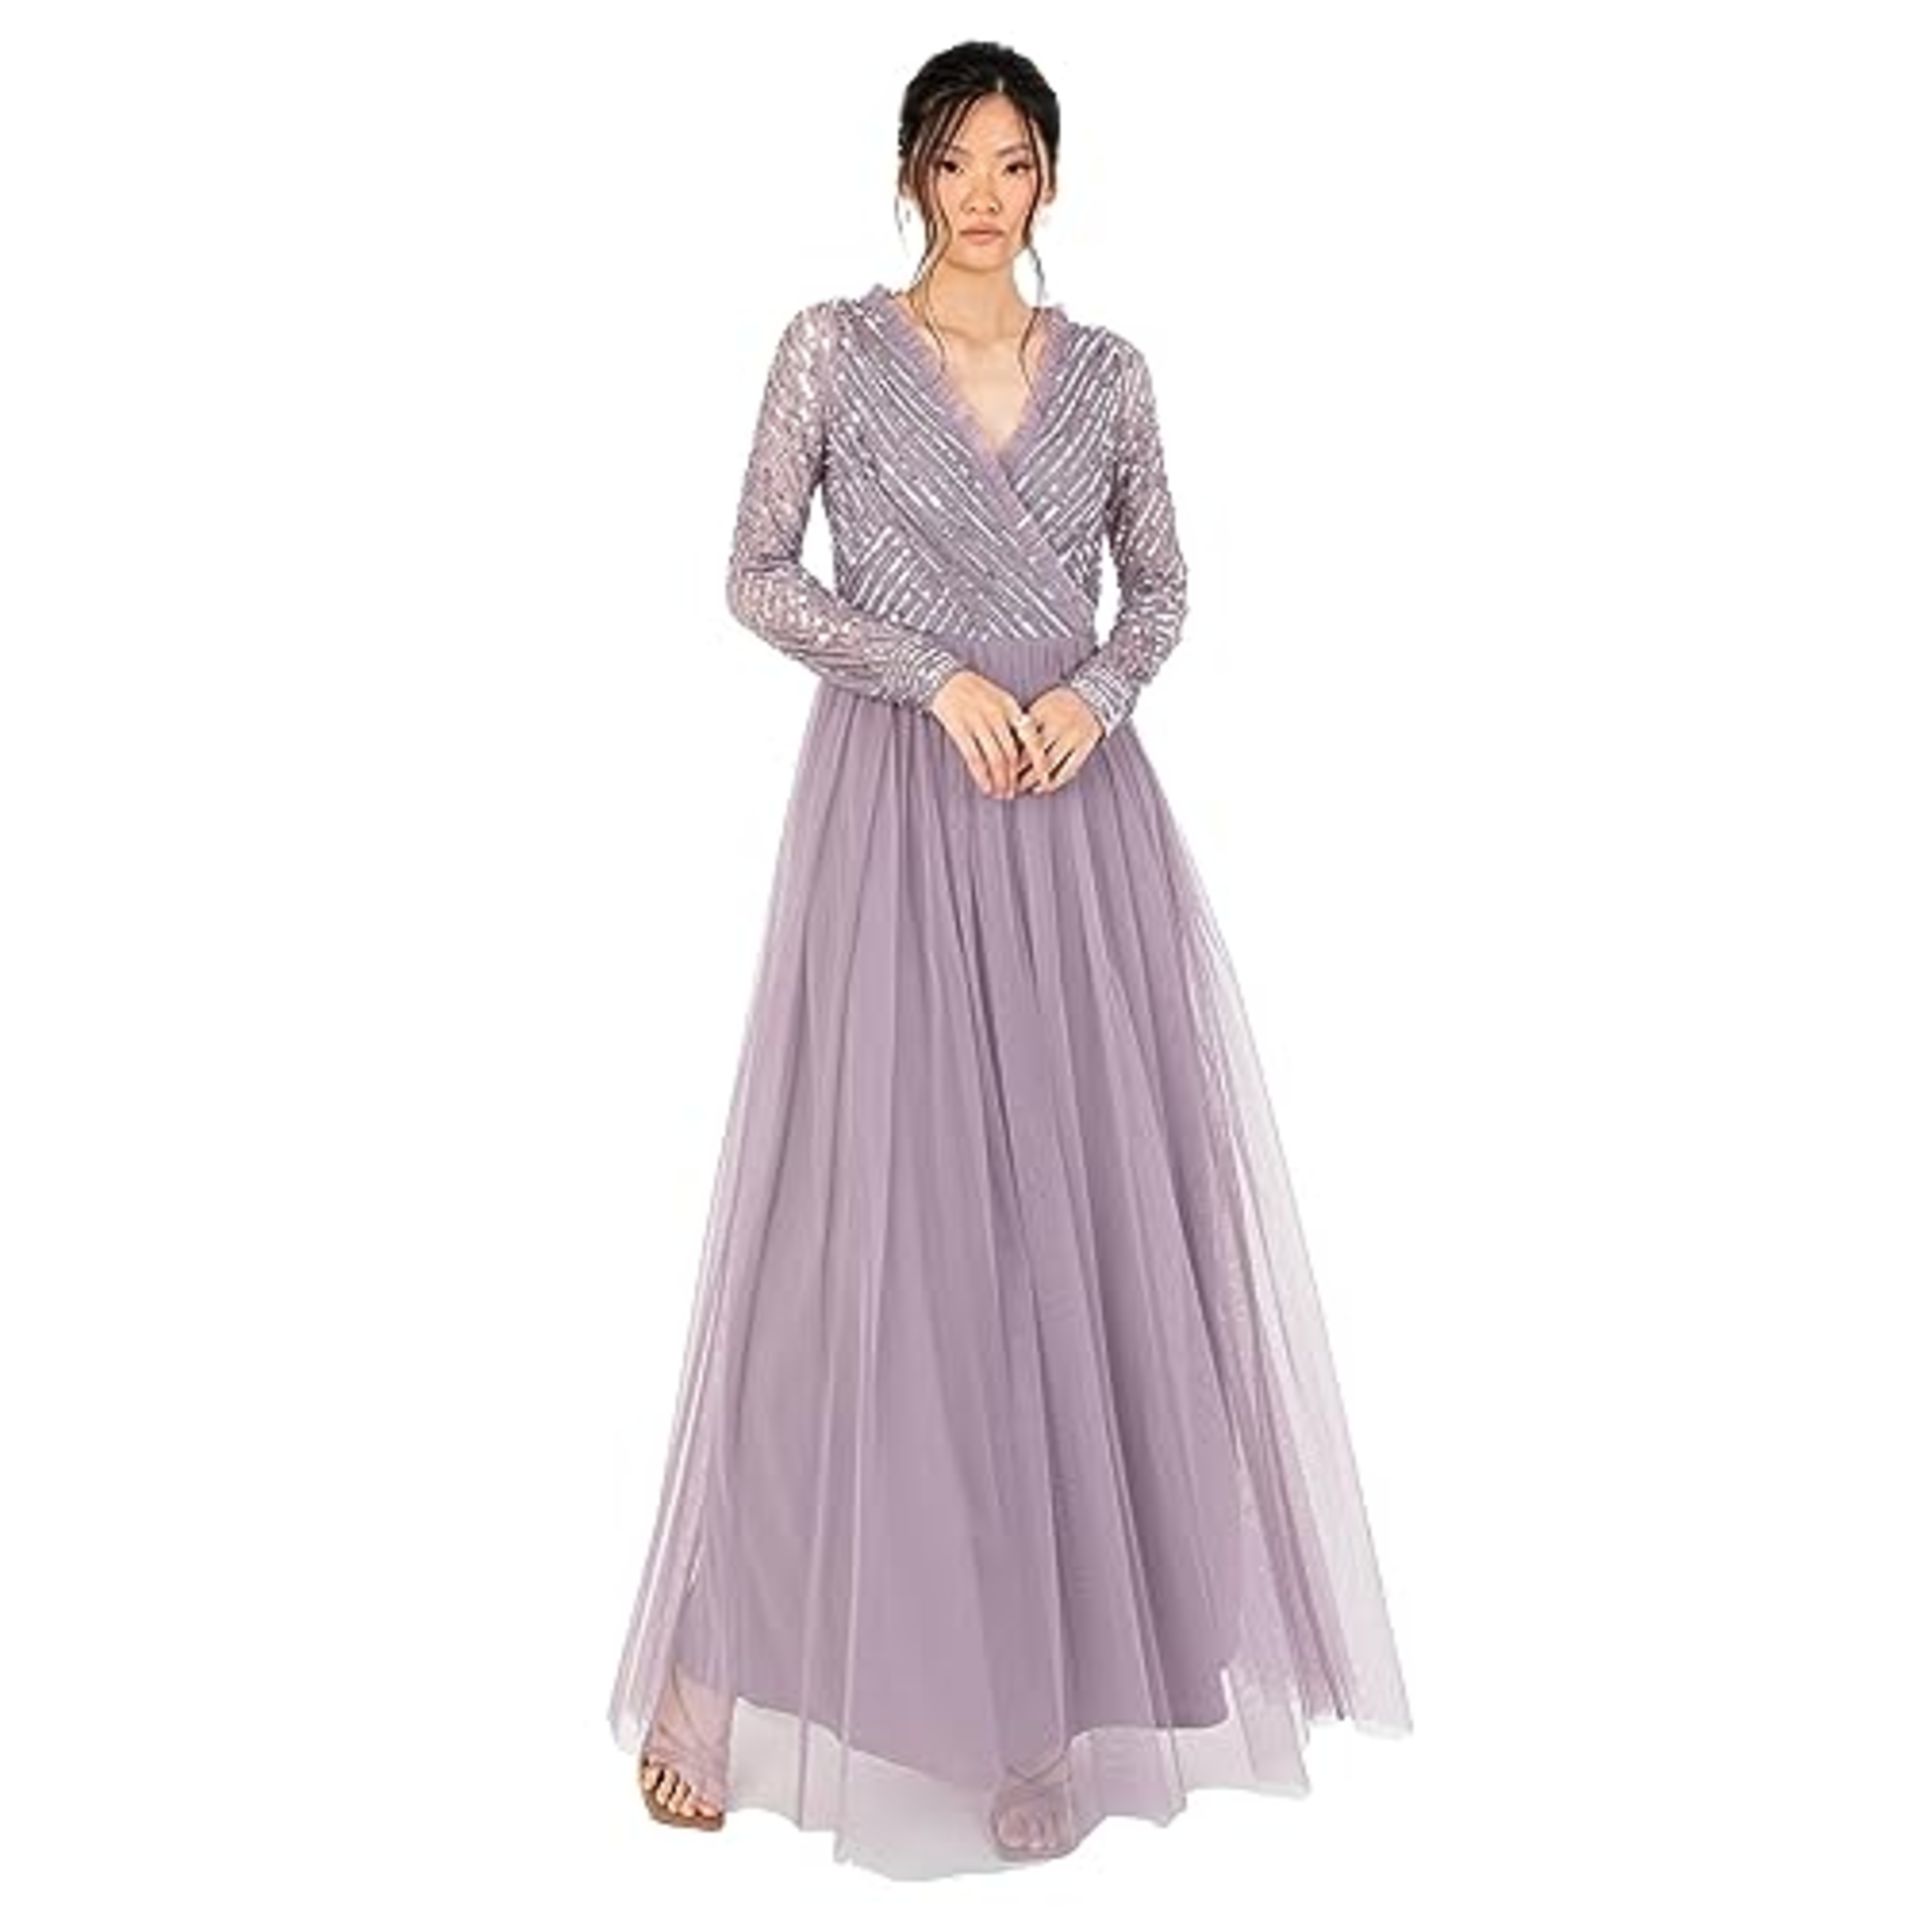 RRP £98.00 Maxi dress for women with embellishments, wrap design, tulle frills, and V-neck. Perfe